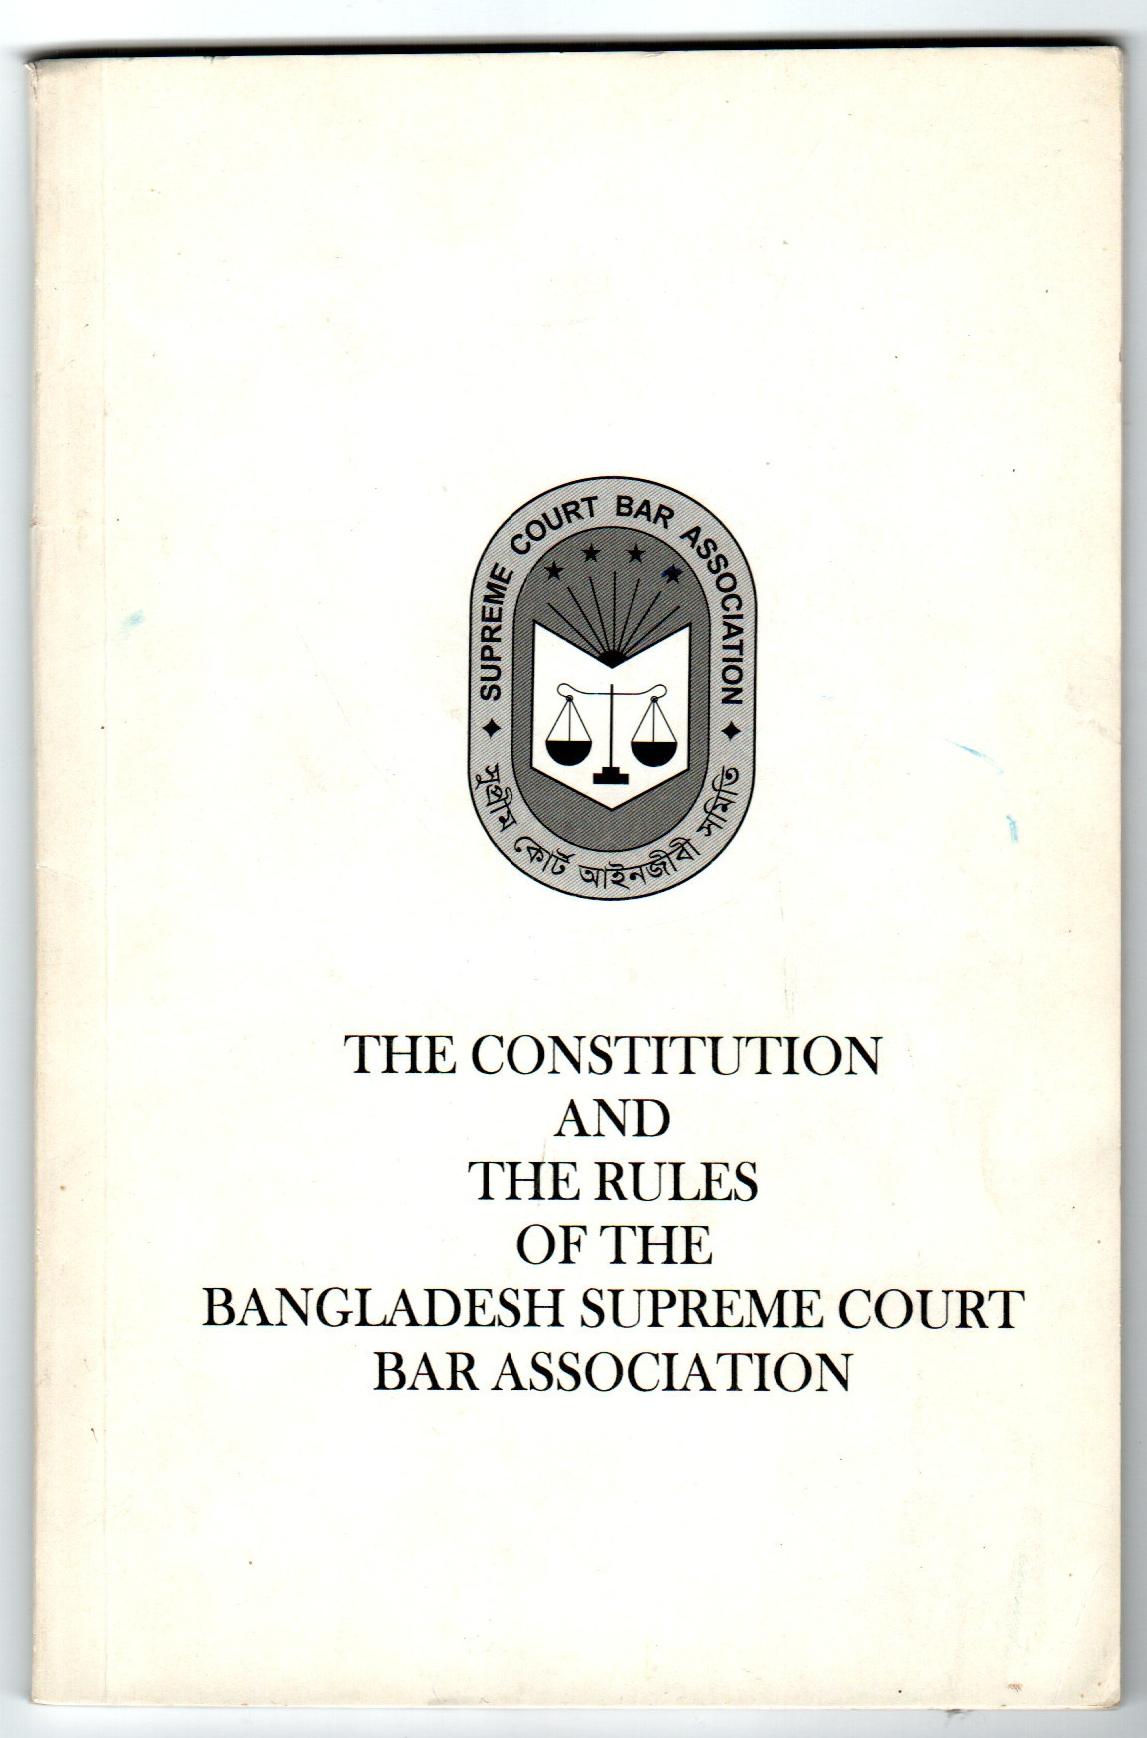 The Constitution and the Rules of the Bangladesh Supreme Court Bar Association